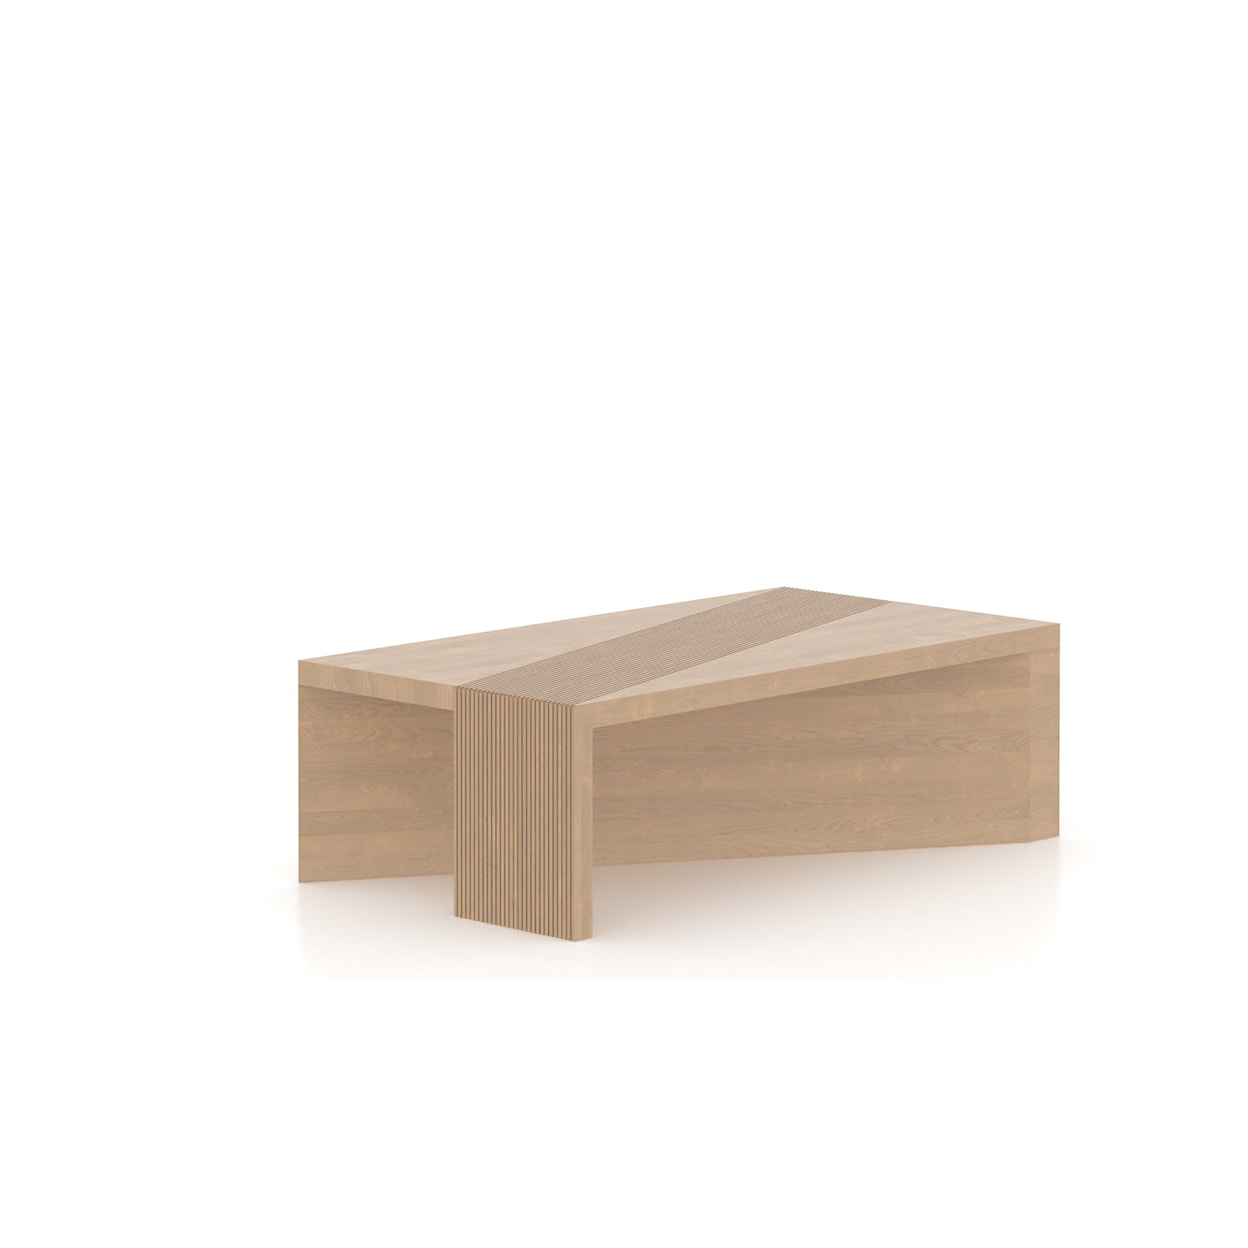 Canadel Accent Artsy Rectangular Coffee Table